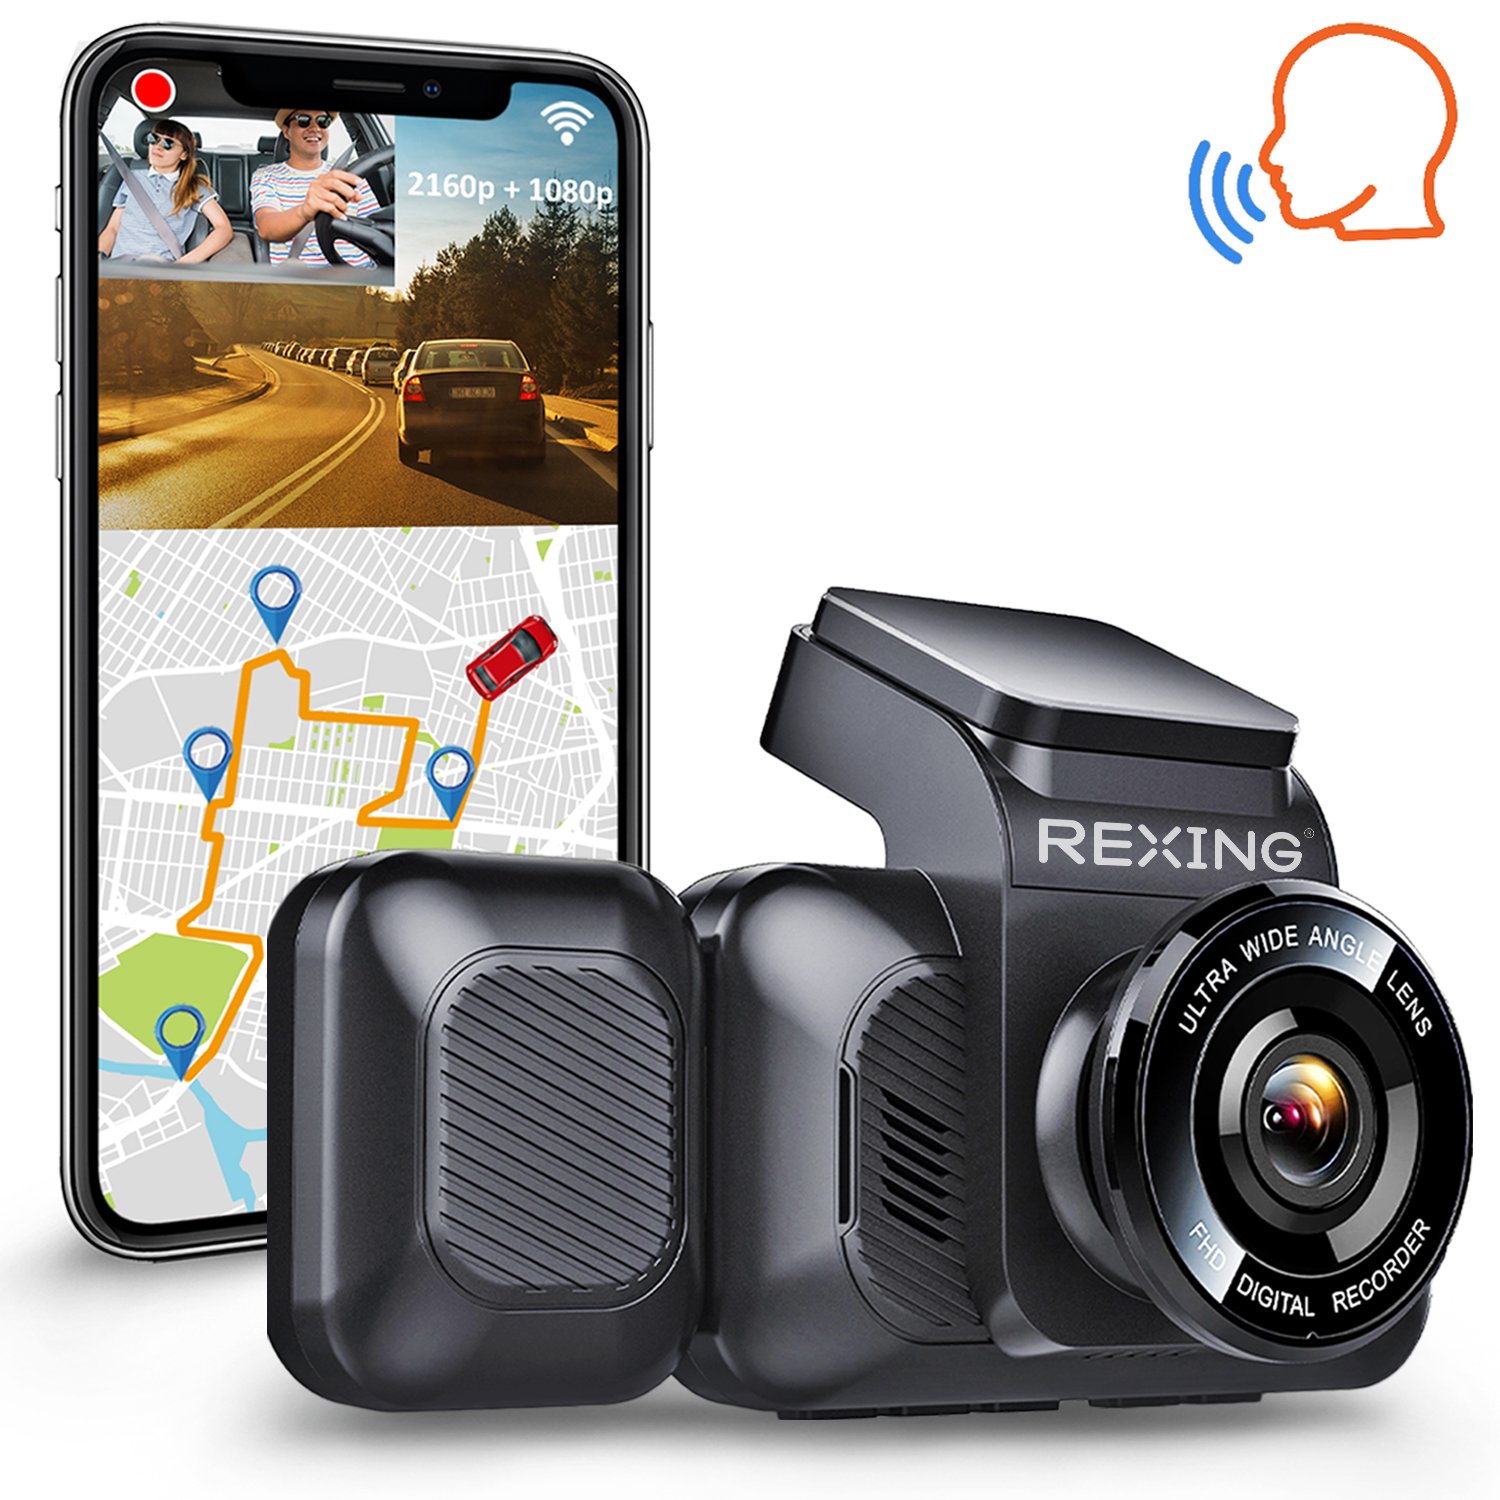 https://couponbowls.com/wp-content/uploads/2023/10/REXING-V5C-Basic-Dash-Cam-Front-4K-amp-1080p-Cabin-Camera-w-Modular-Capabilities-WiFi-and-GPS.jpg